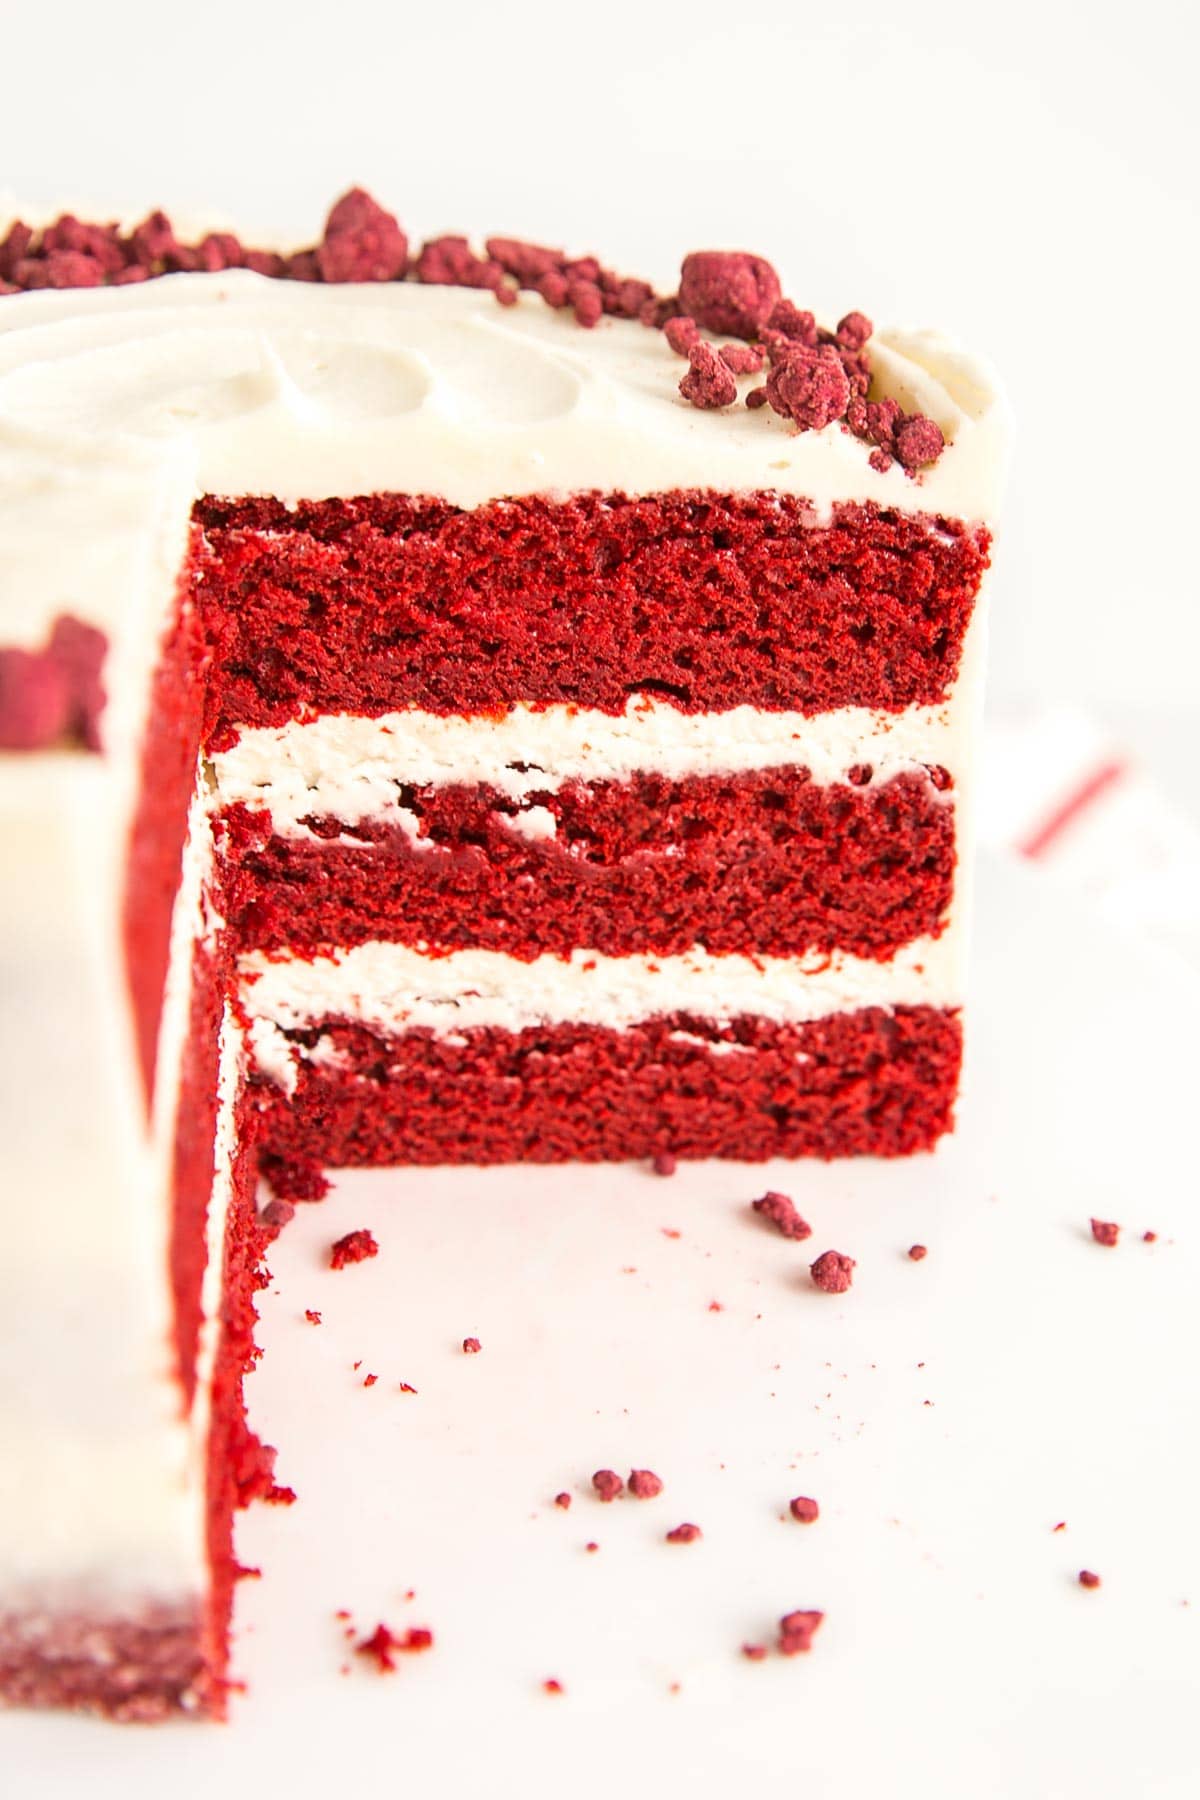 Inside of the cake where you can see the red velvet cake layers.